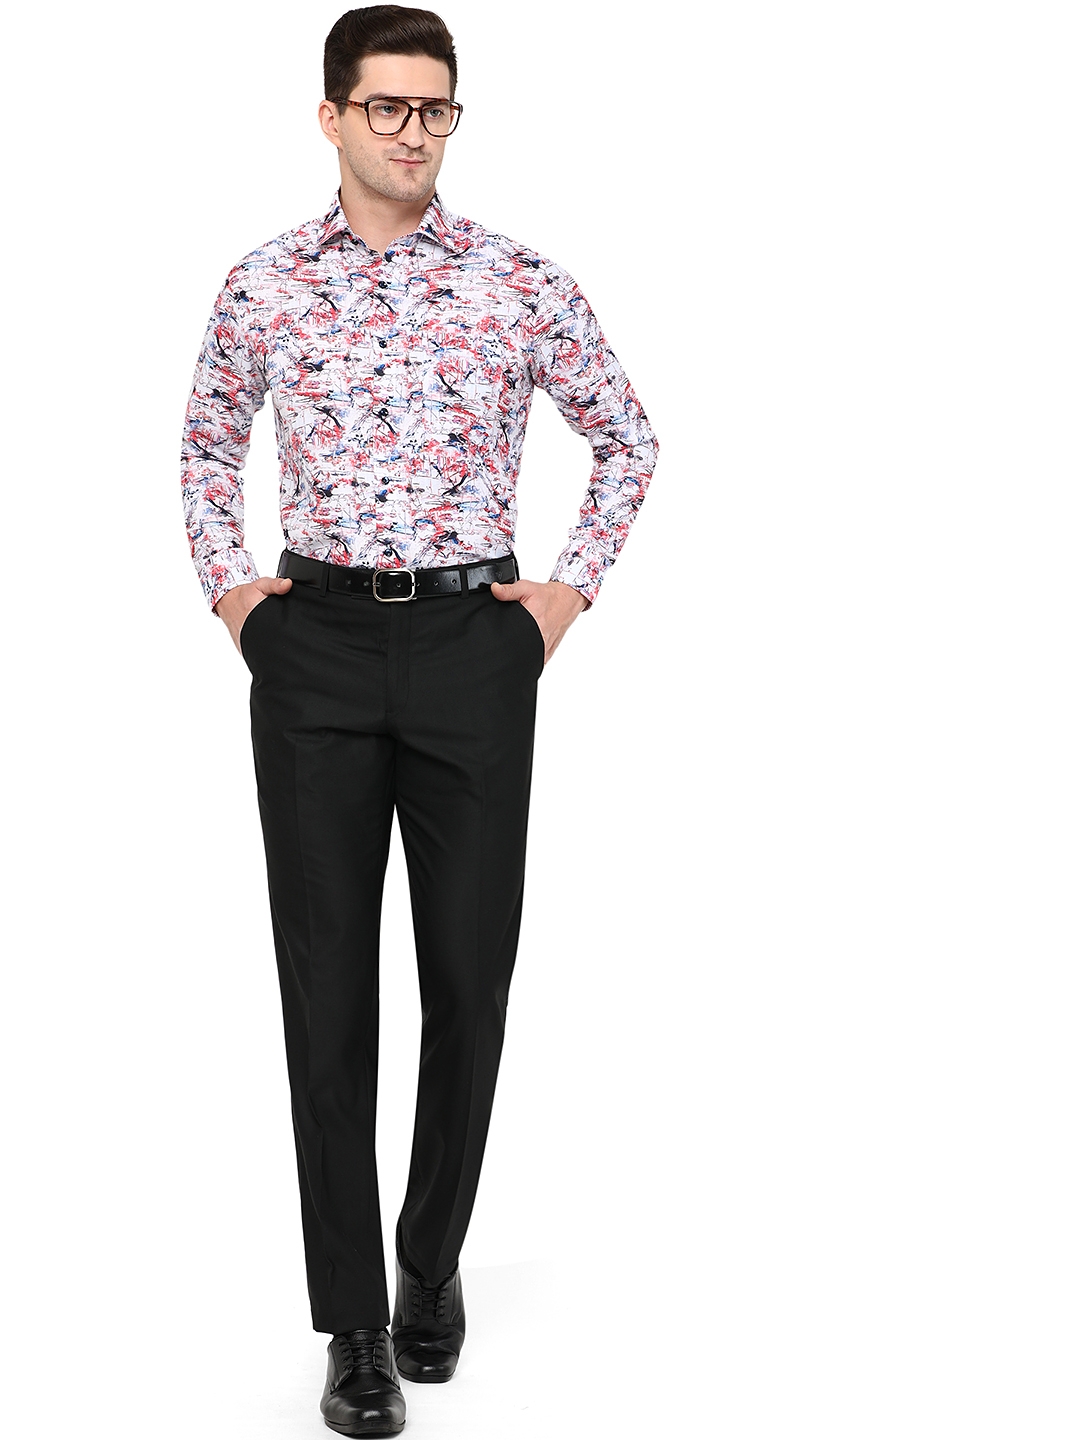 Greenfibre | Multicolor Printed Slim Fit Party Wear Shirt | Greenfibre 3